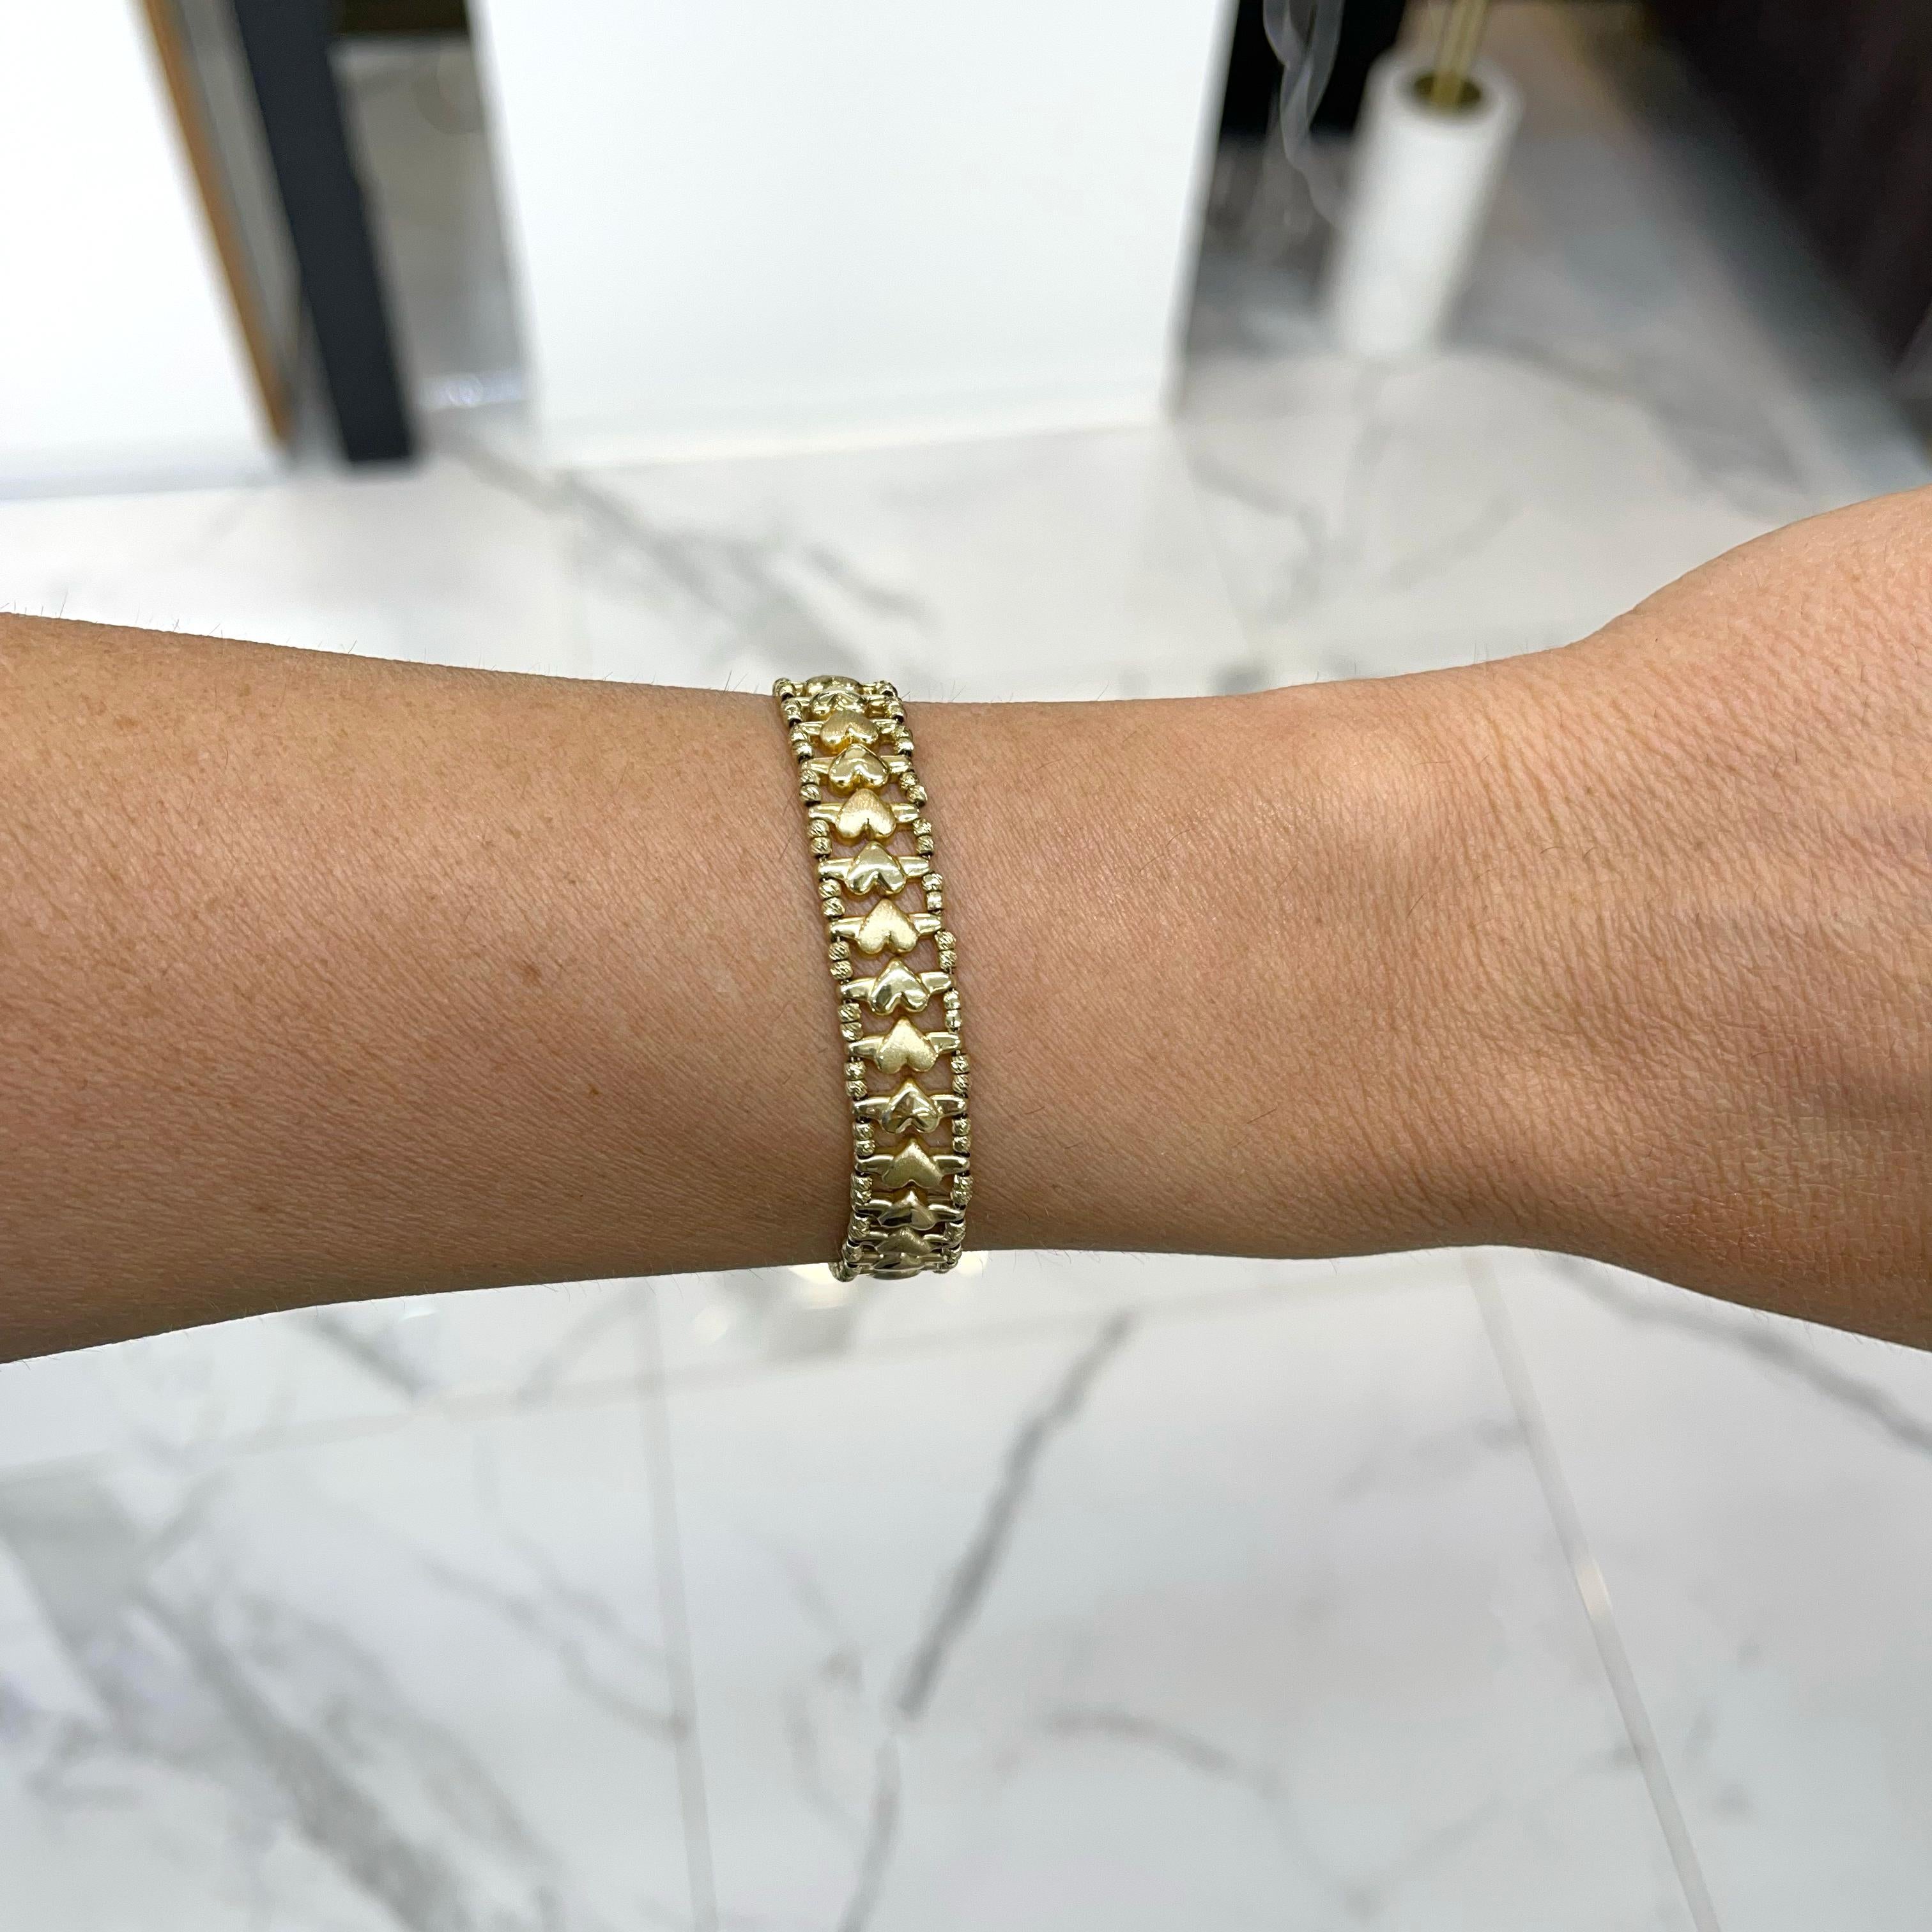 Ladies 14k Yellow Gold Heart Link Bracelet In Excellent Condition For Sale In Houston, TX